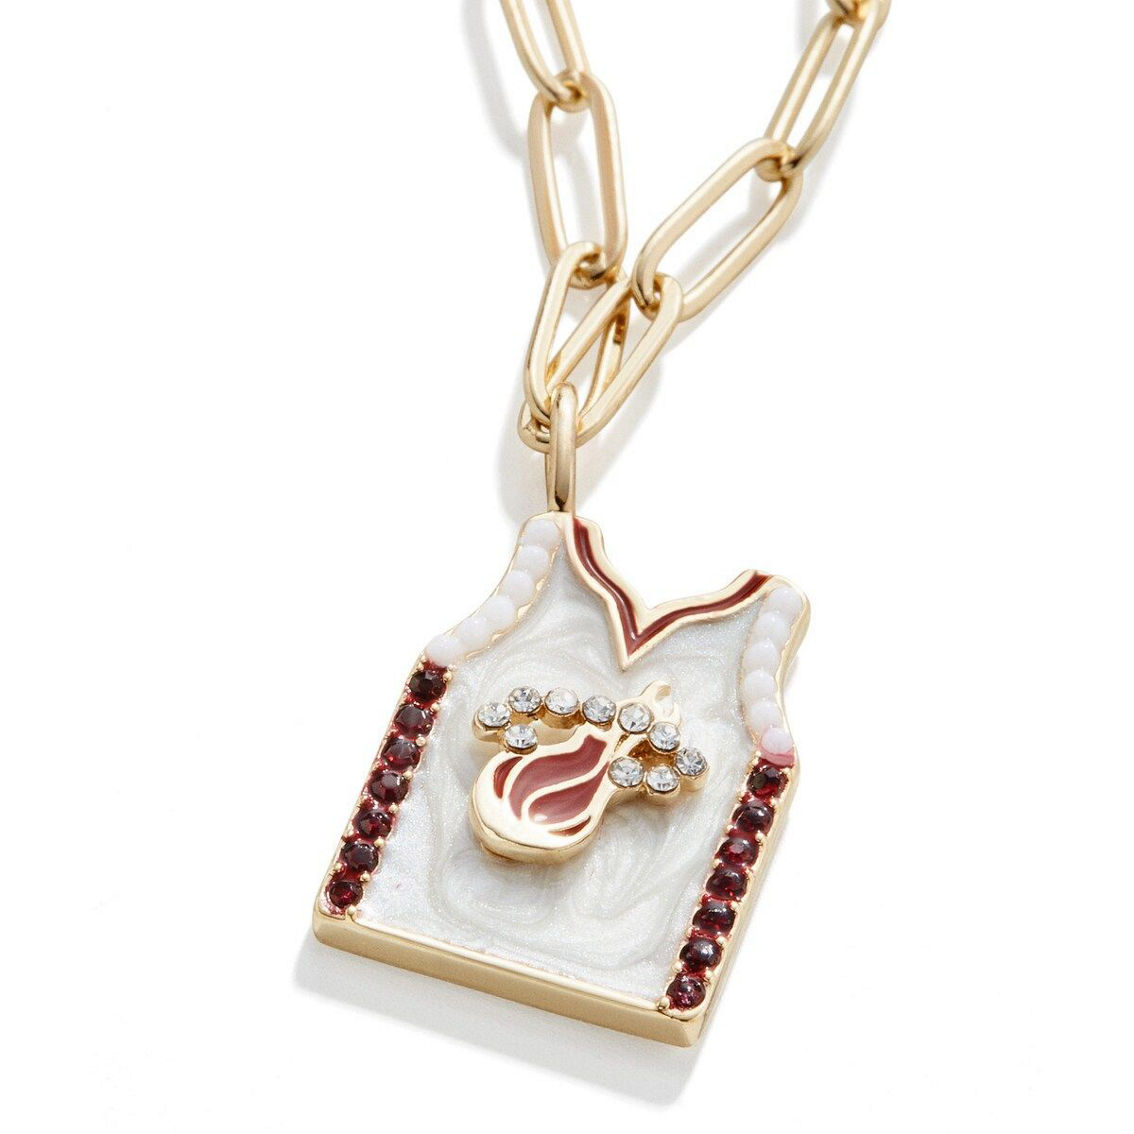 BaubleBar Miami Heat Team Jersey Necklace - Image 3 of 4